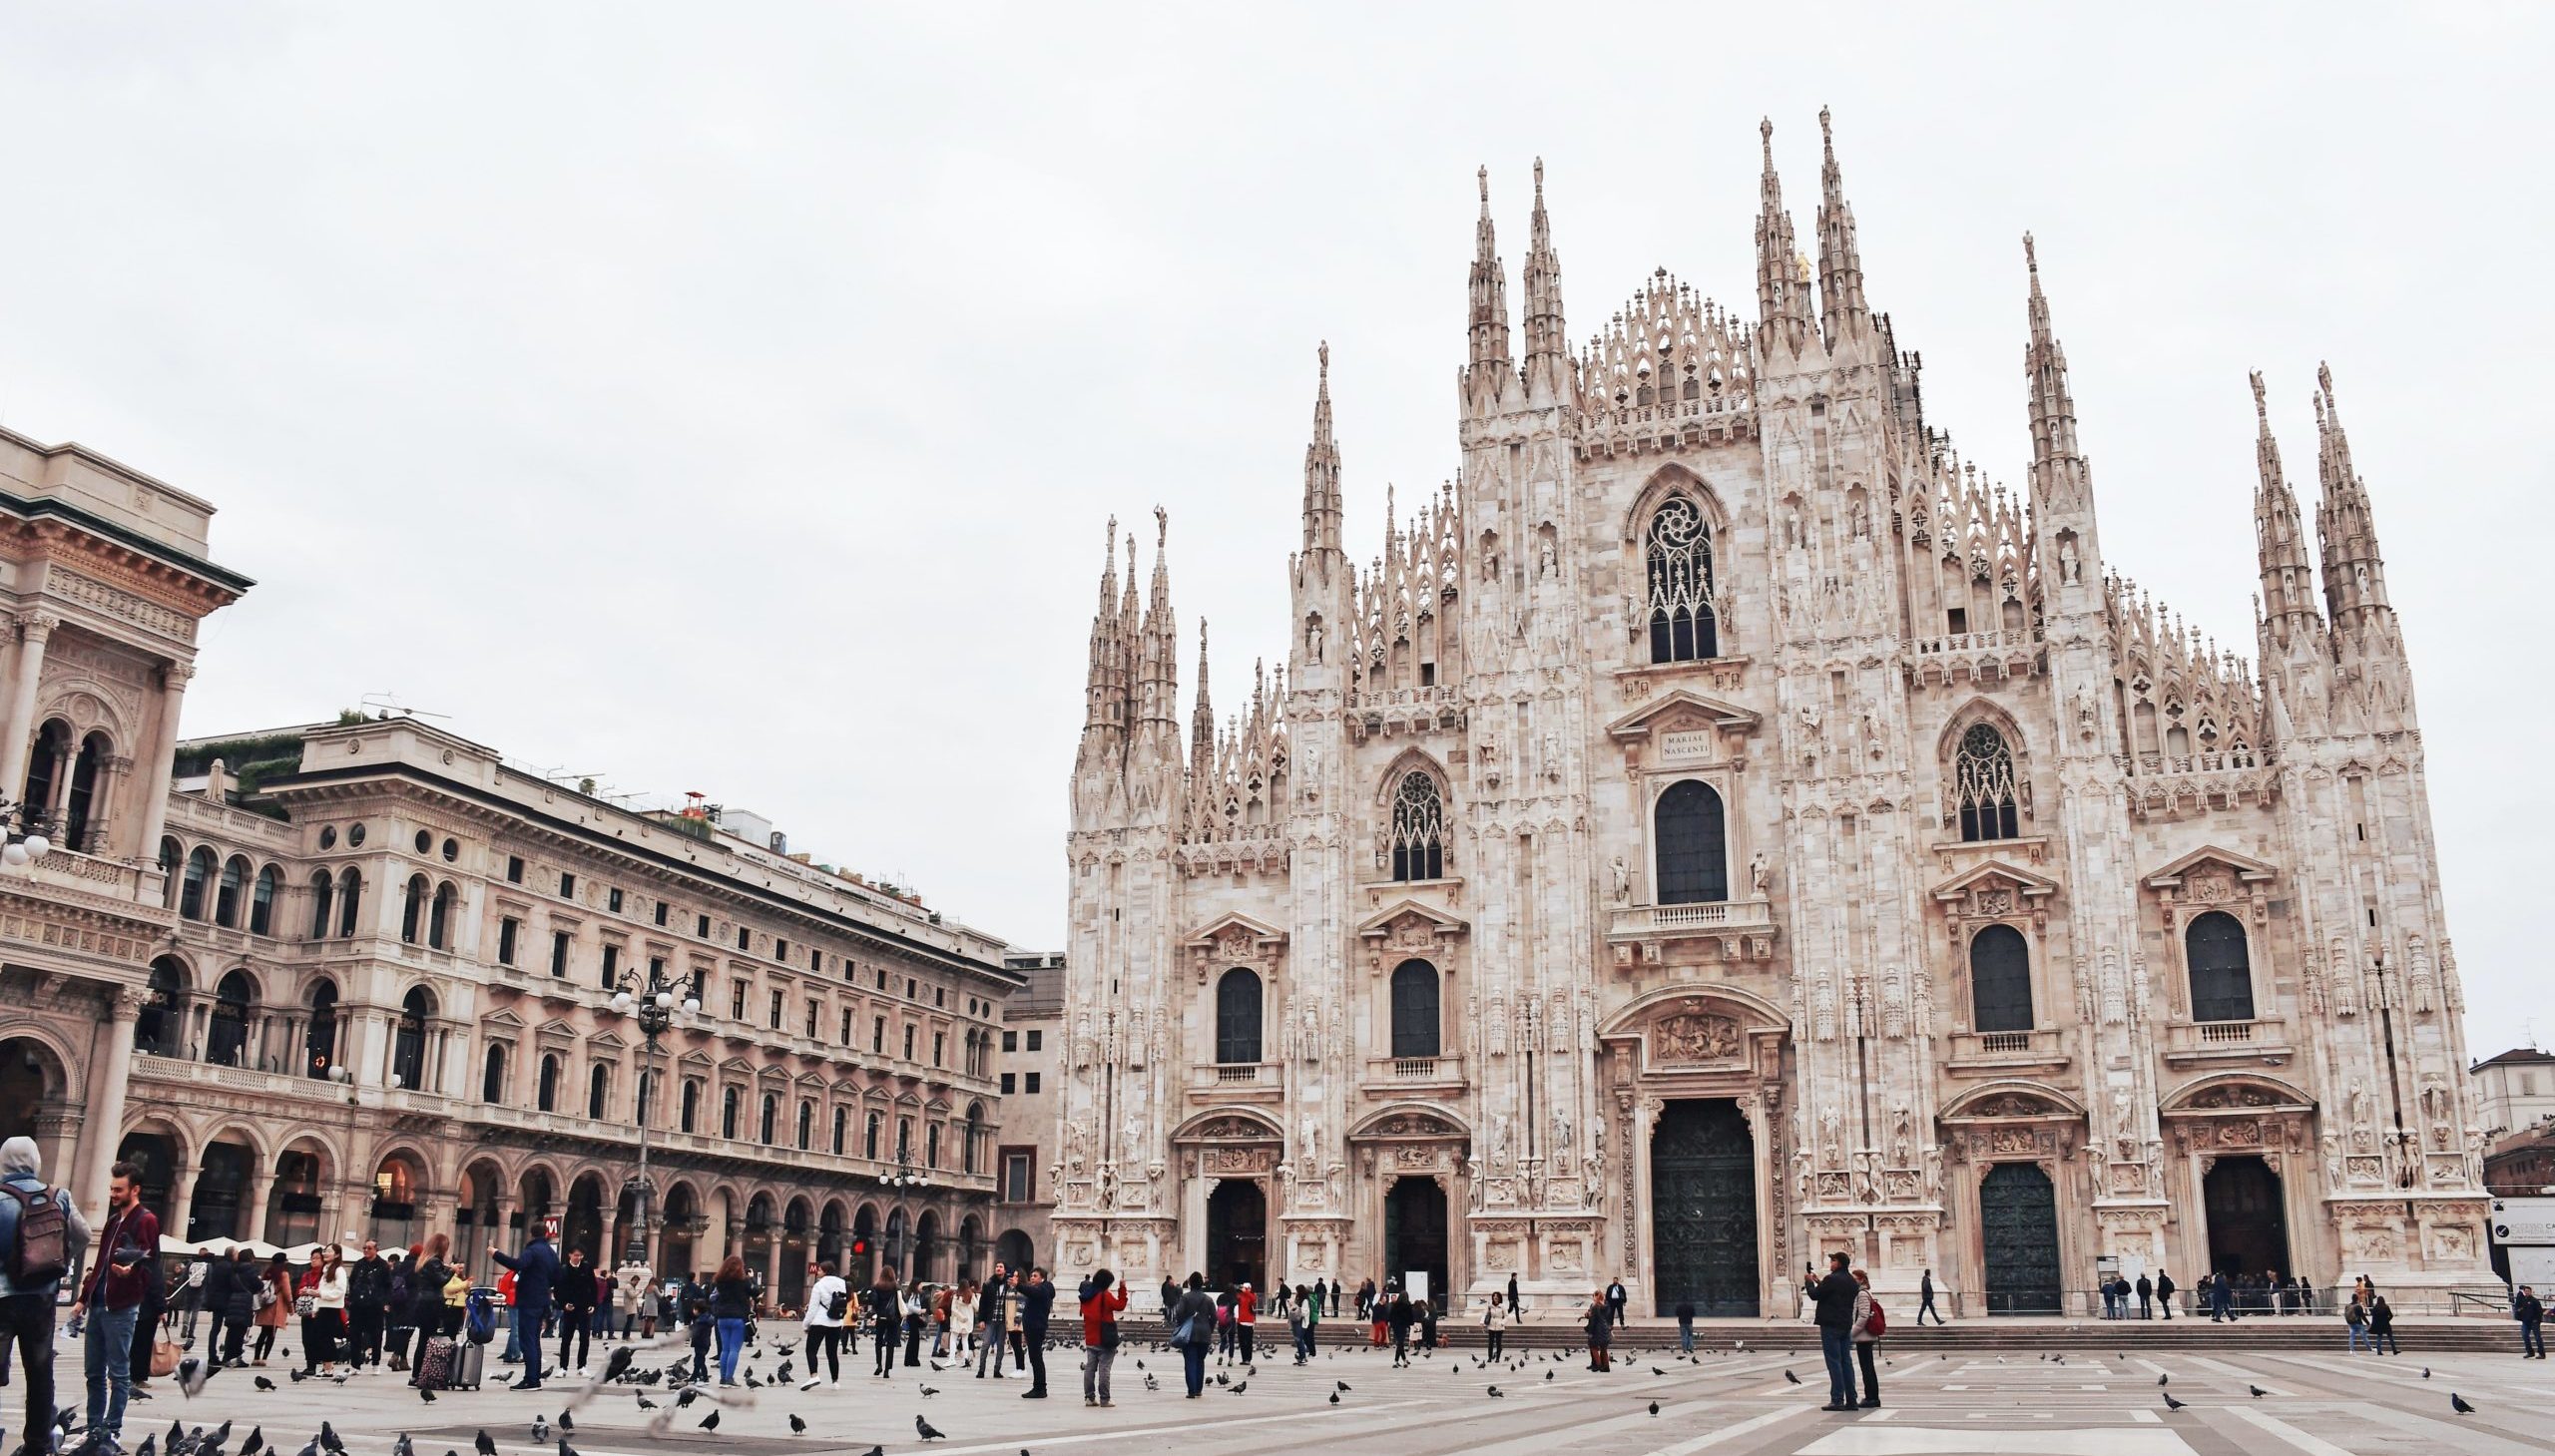 A view of the Duomo of Milan and its square